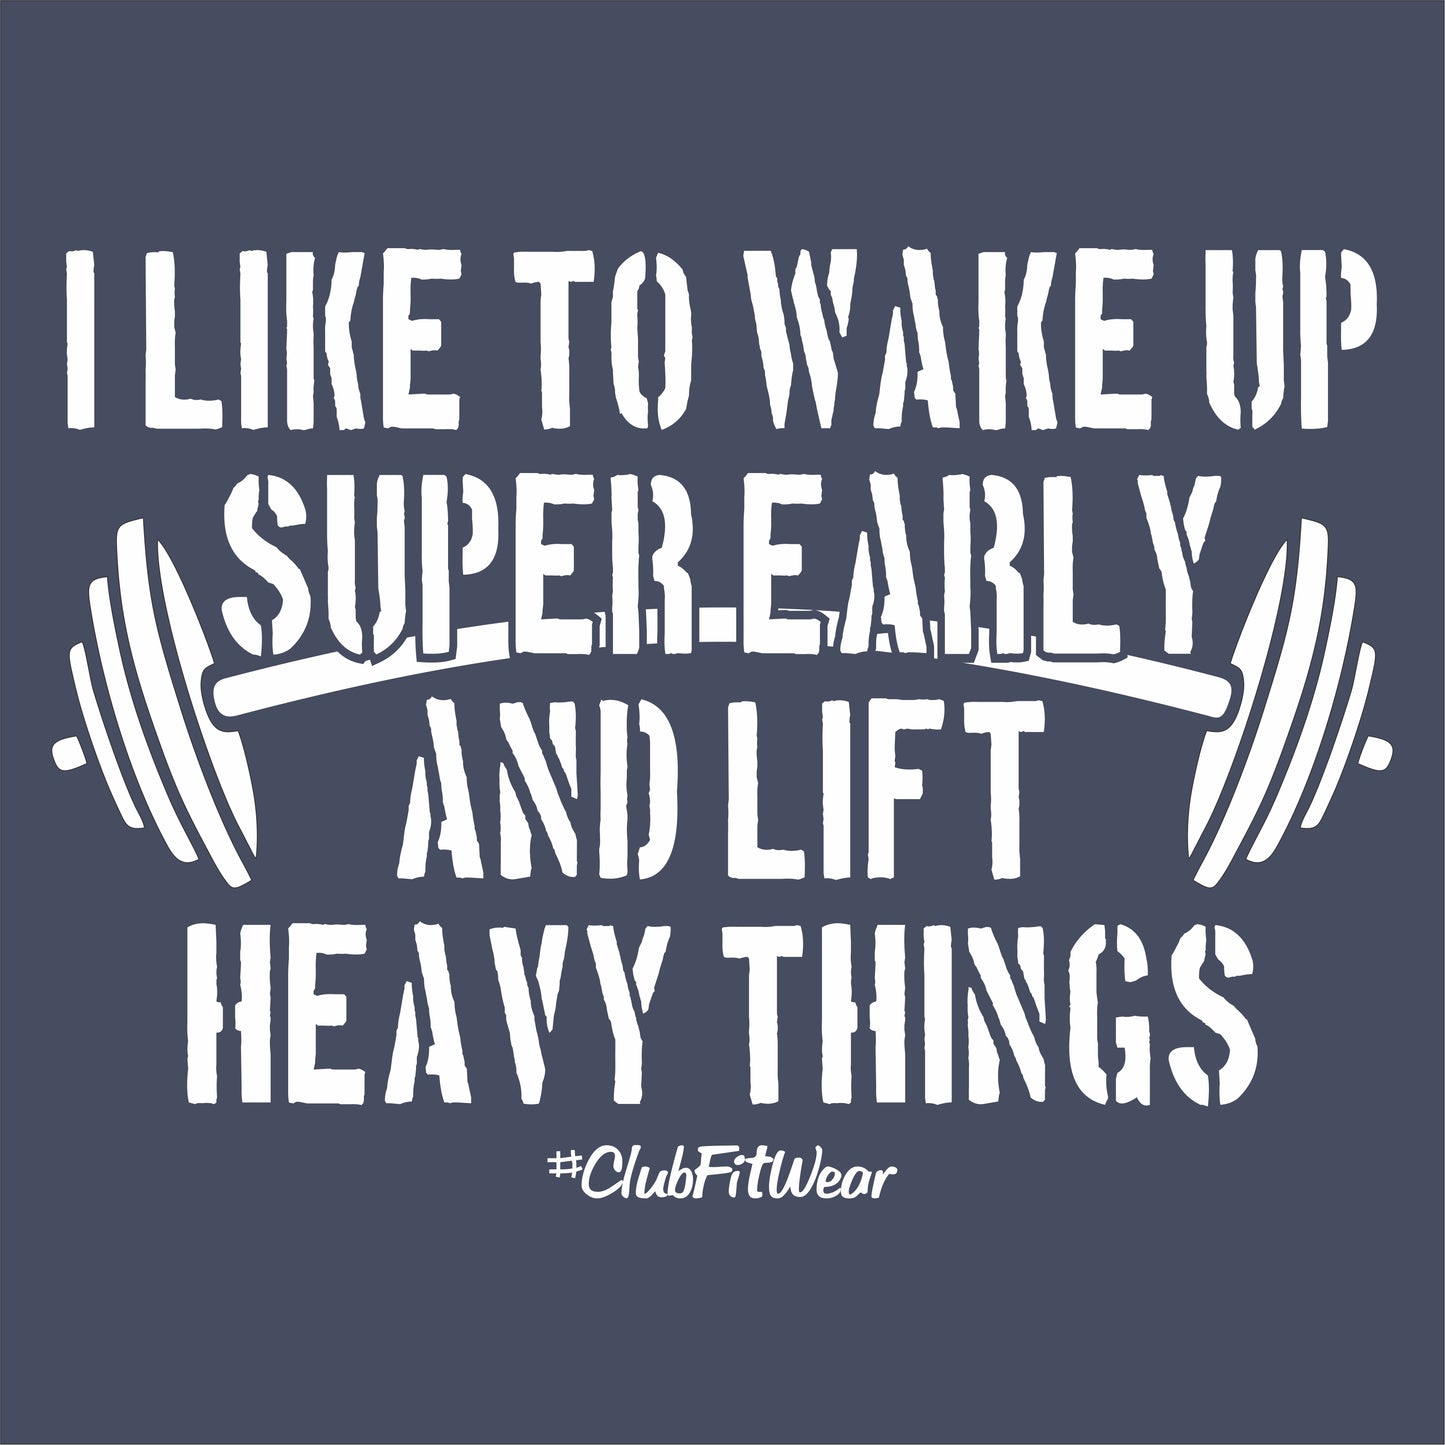 I like to wake up super early and lift heavy things